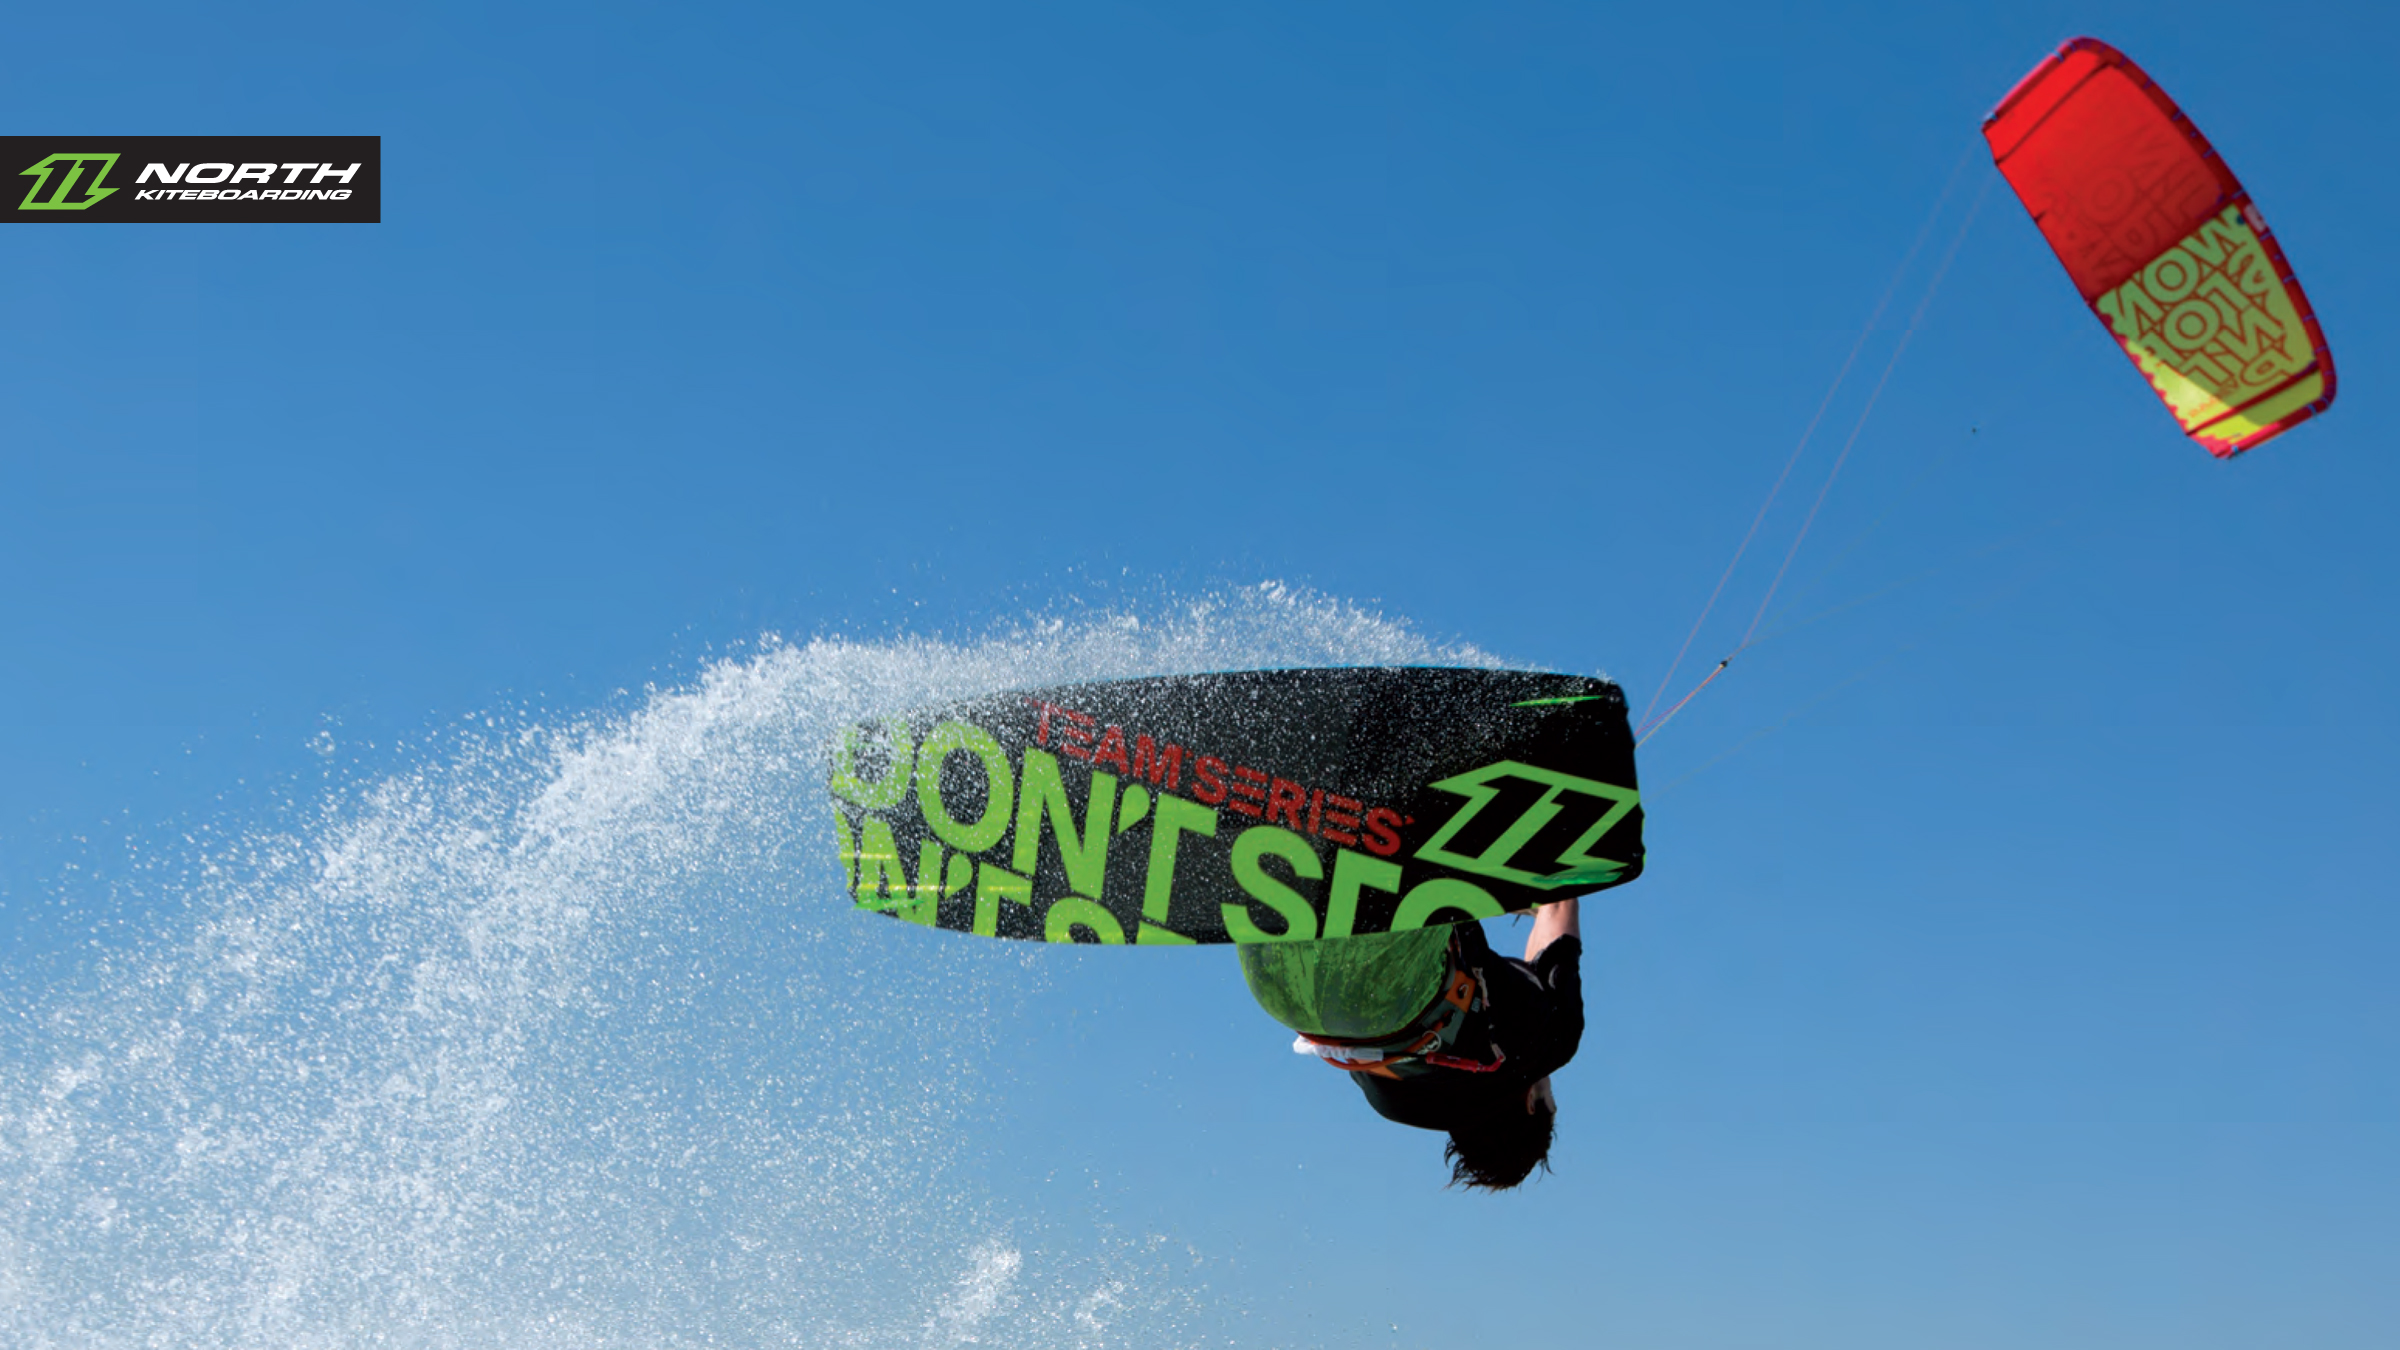 kitesurf wallpaper image - The 2015 North Vegas and team series board on holiday in the tropics - kitesurfing - in resolution: High Definition - HD 16:9 2400 X 1350